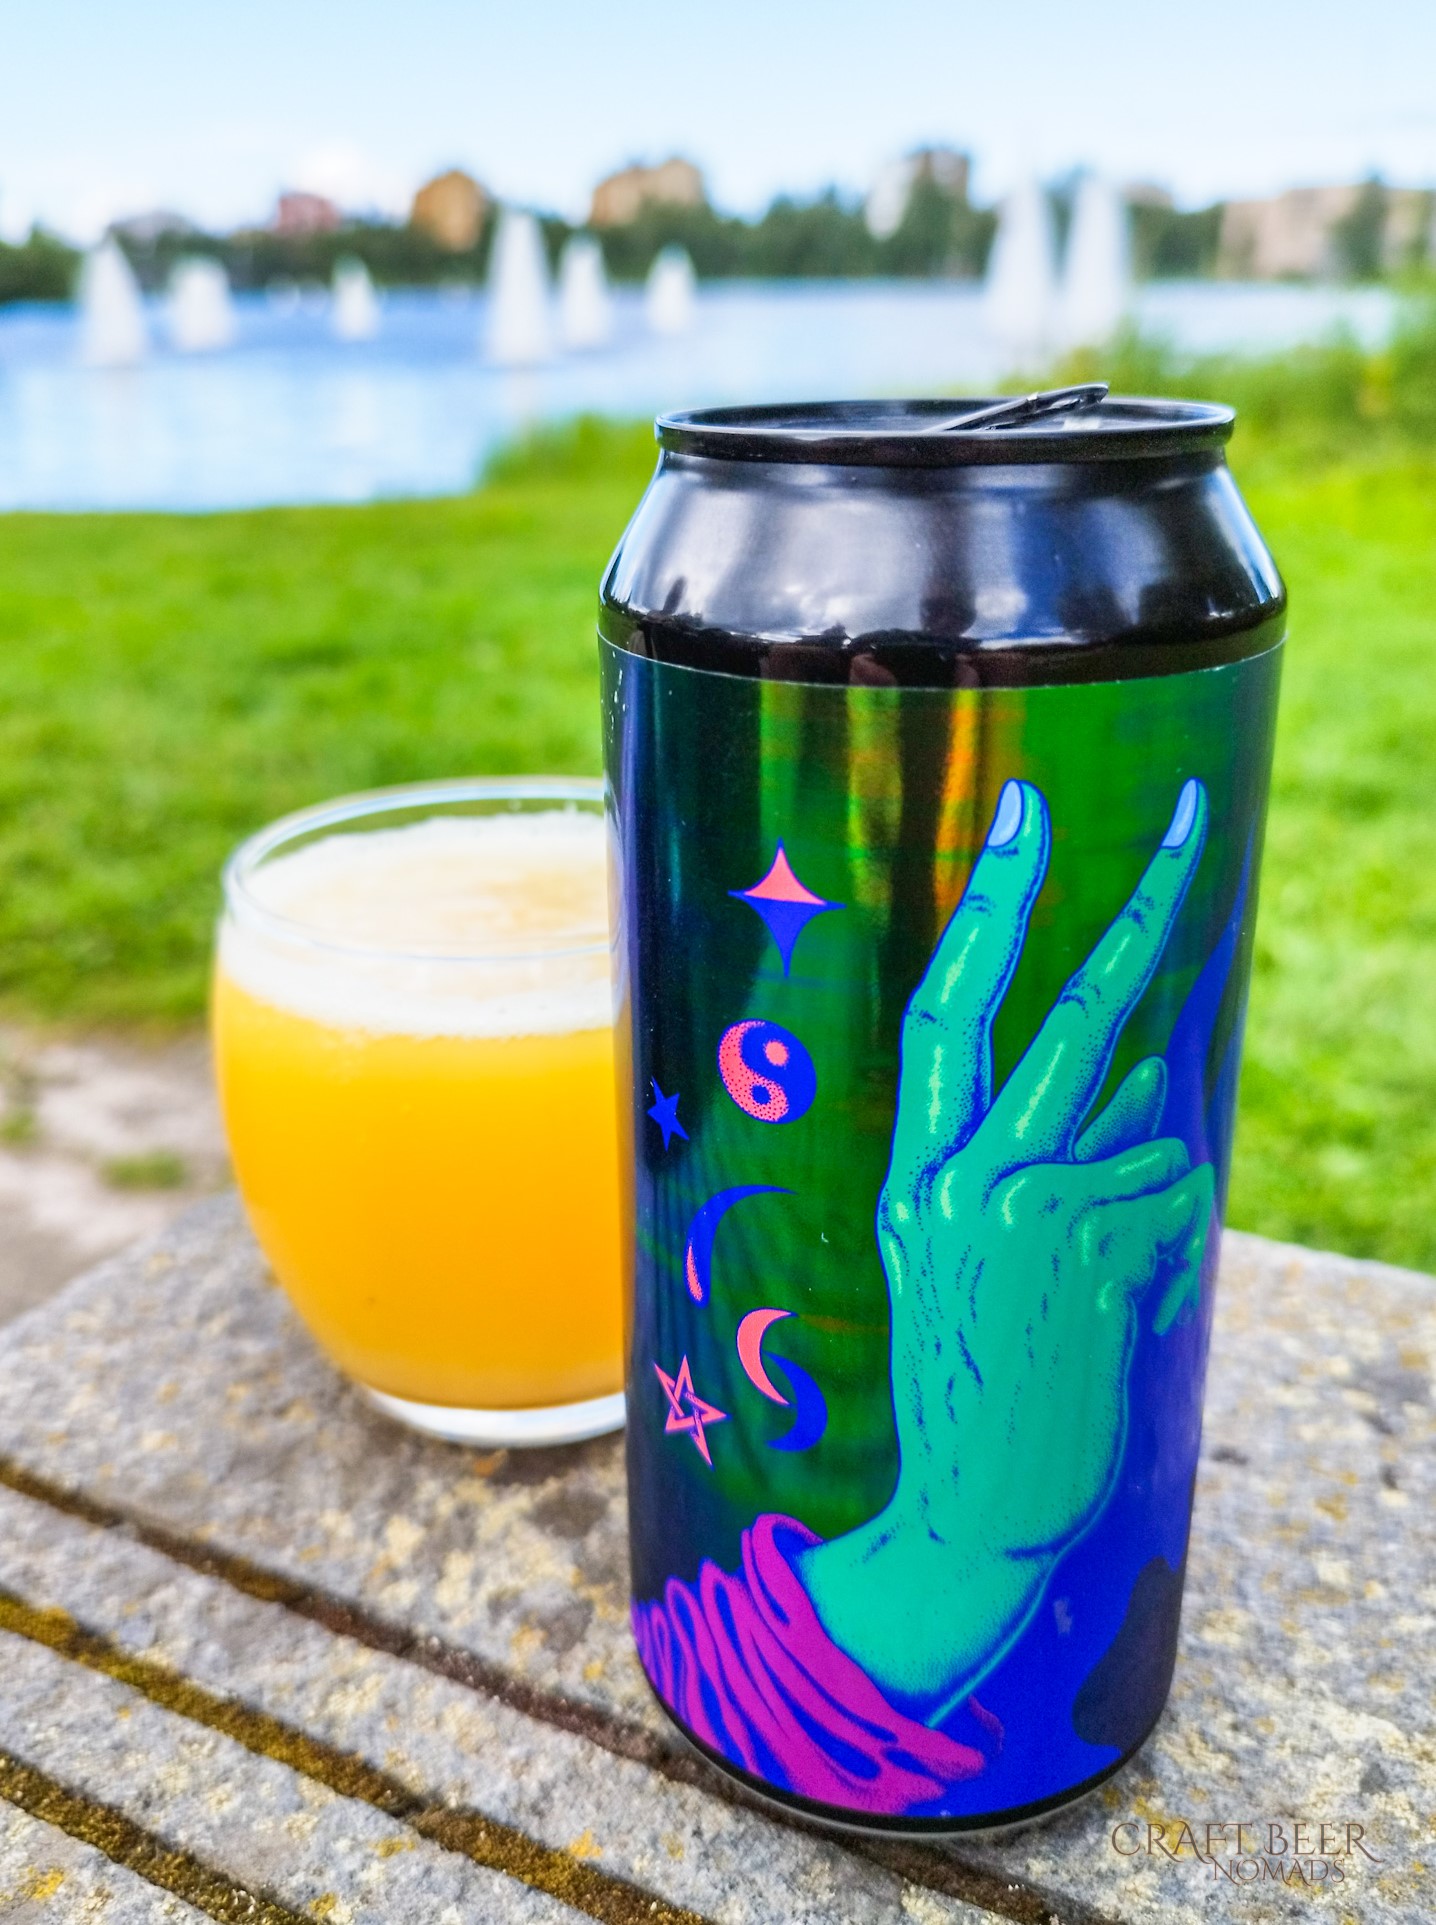 Eliphas | Omnipollo brewery | Craft Beer Nomads blog